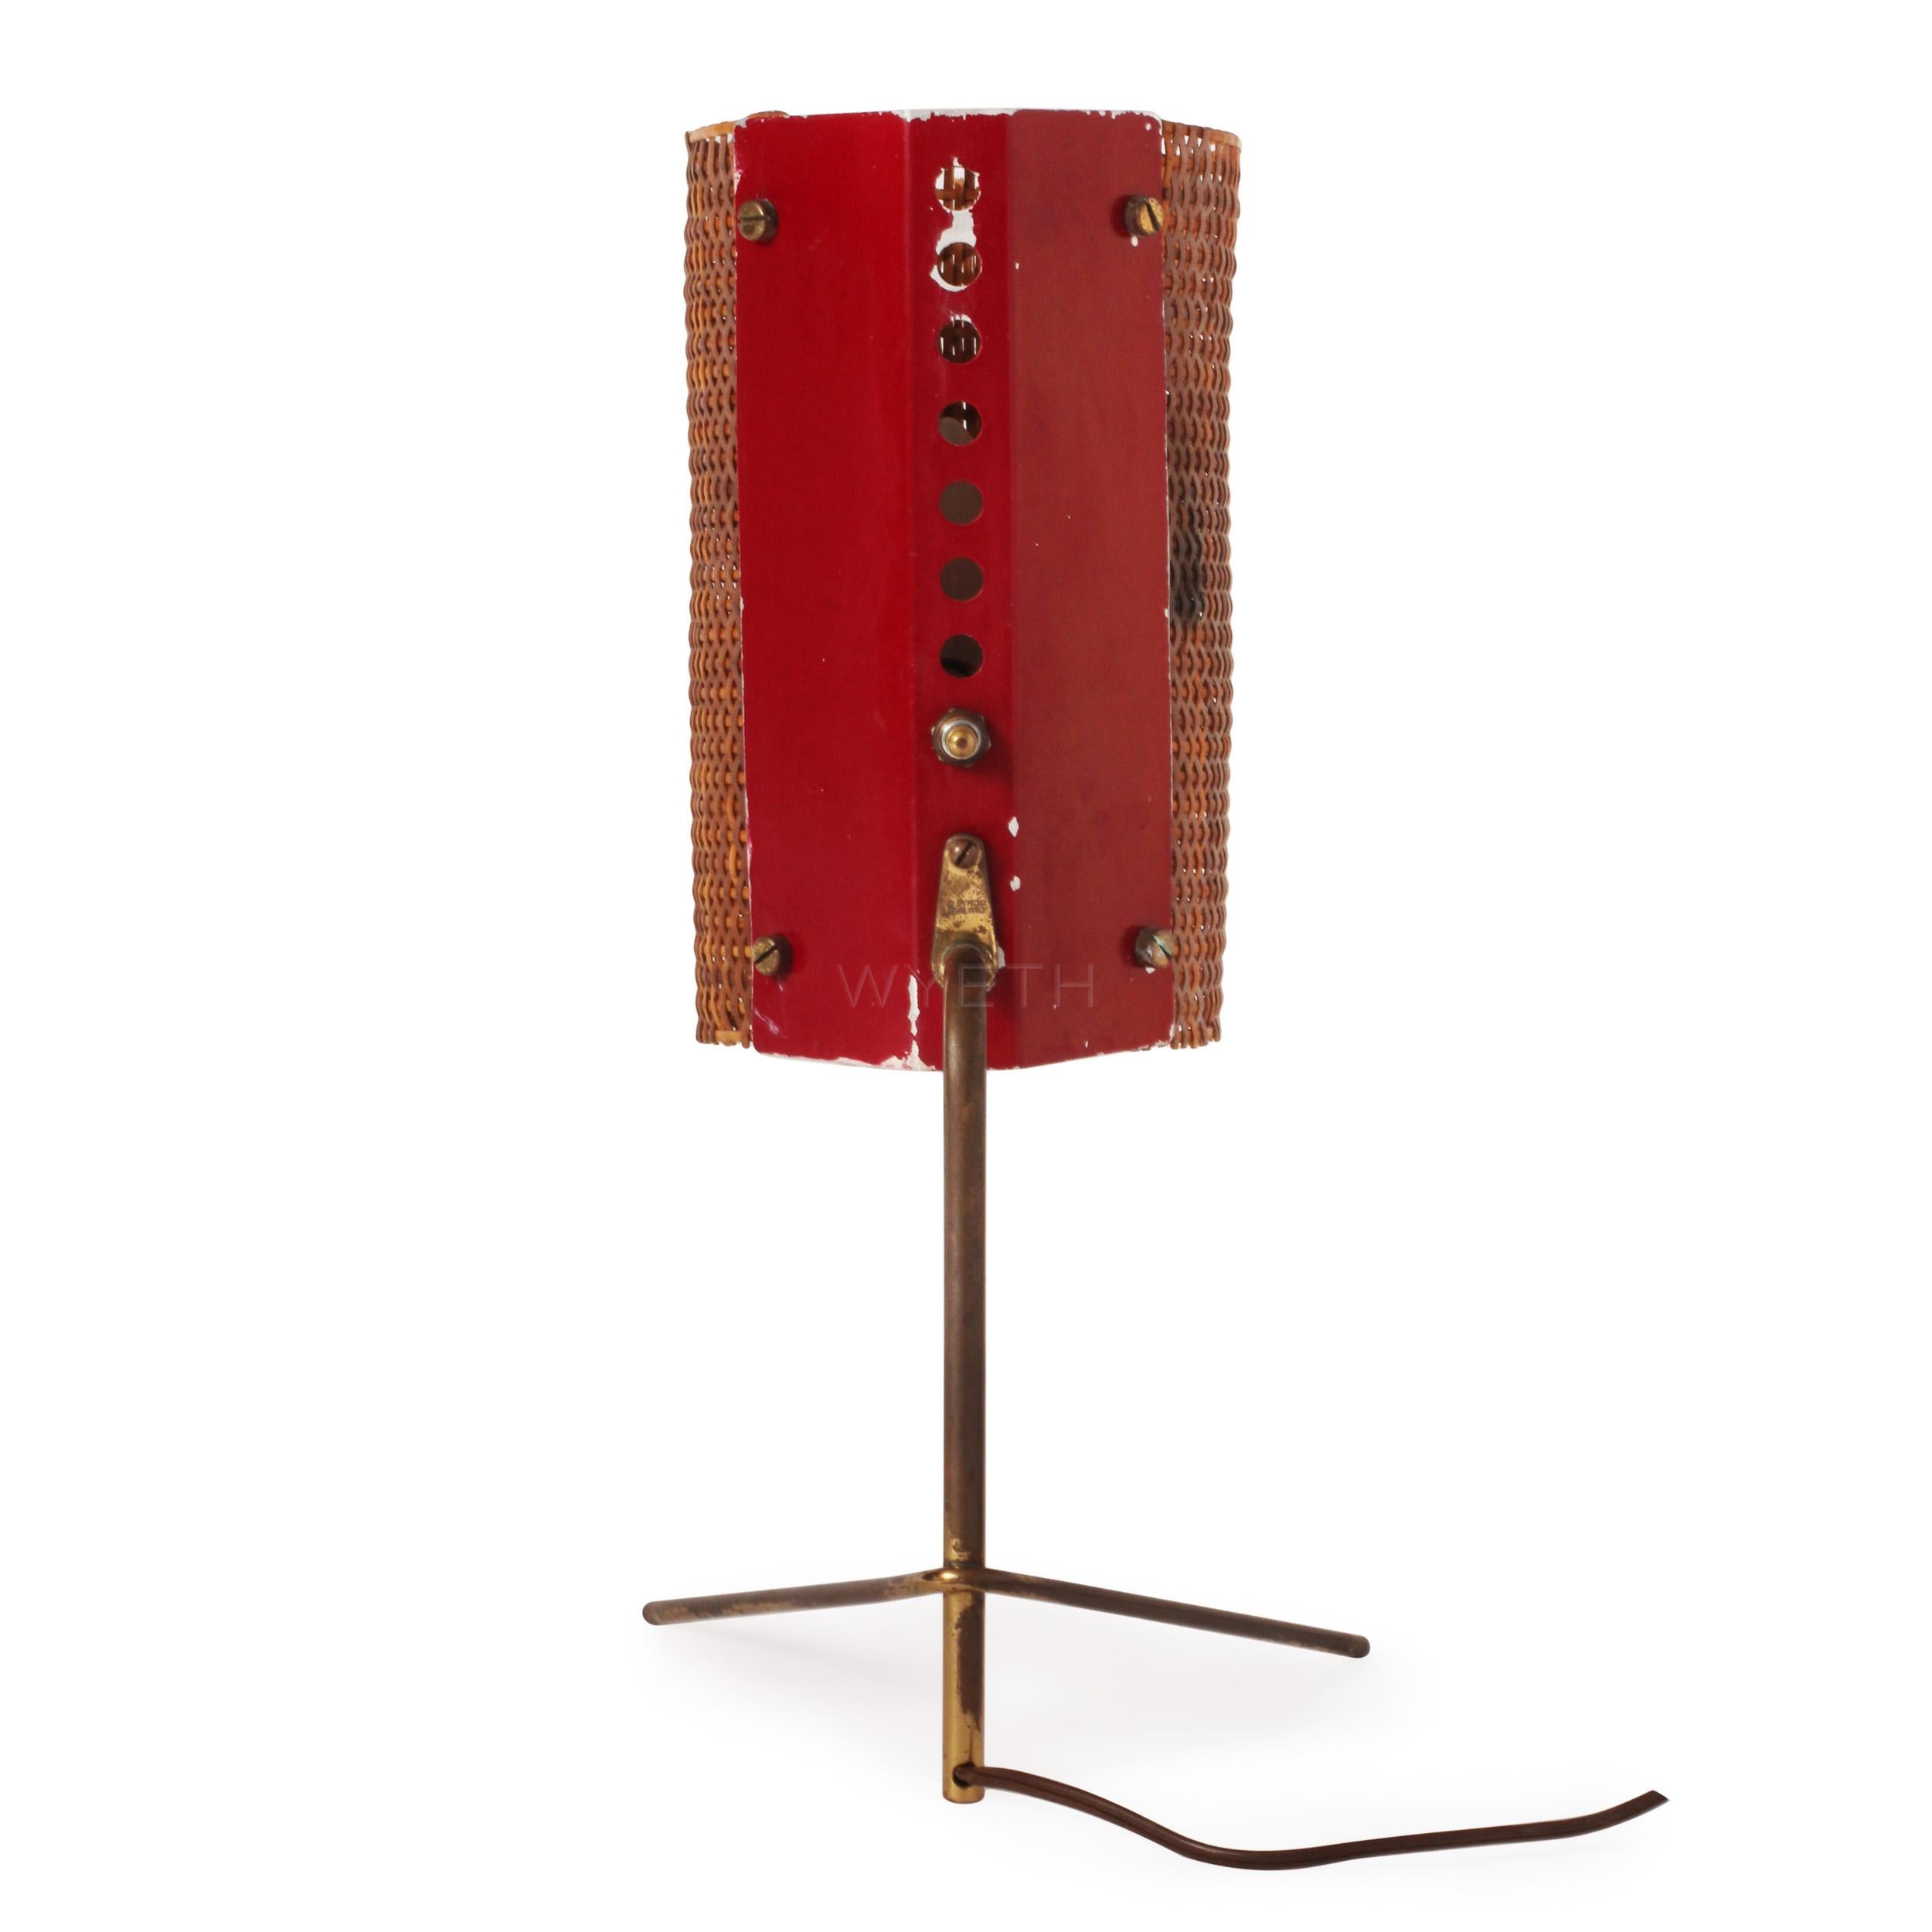 1950s Italian Modernist Table Lamp by Raymor In Good Condition For Sale In Sagaponack, NY